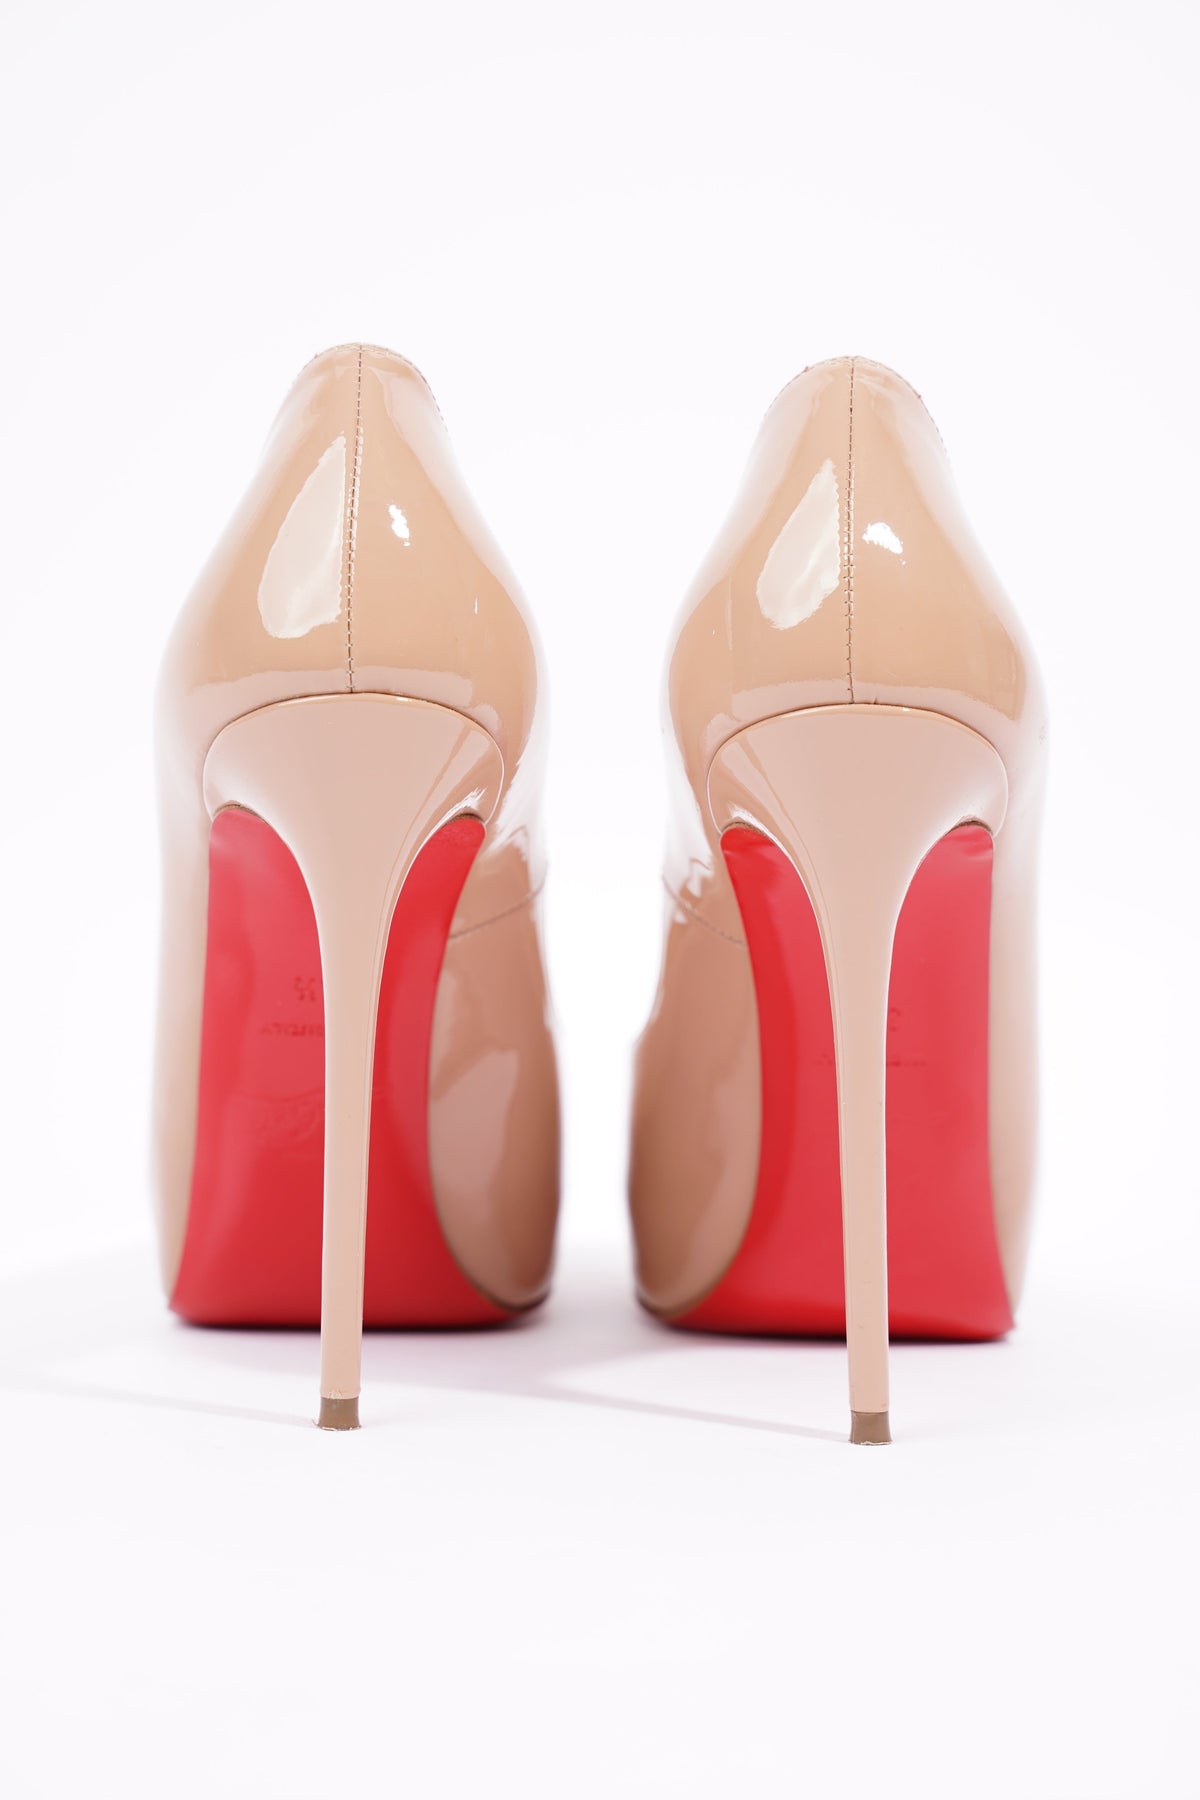 Christian Louboutin Patent Leather New Very Prive Pumps 120 - Nude - 37